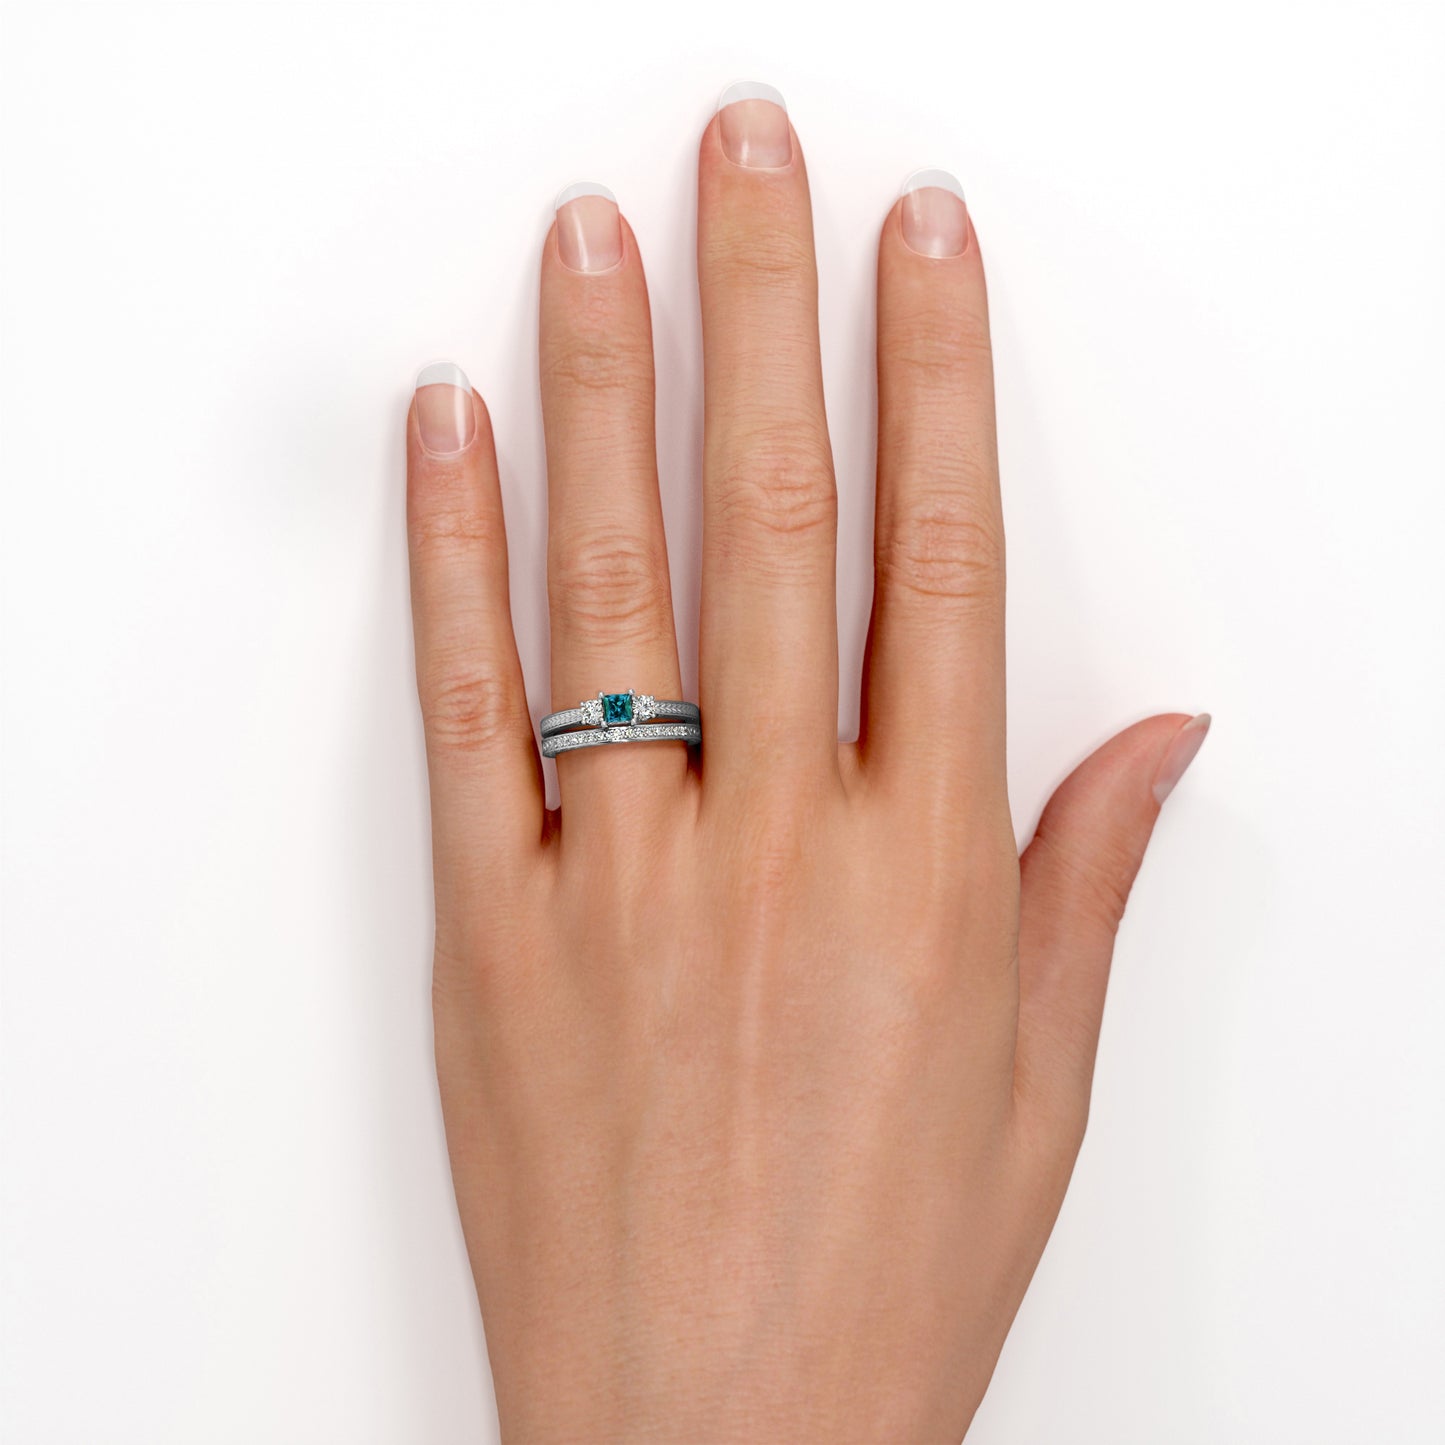 Why You Should Buy Yourself A Fake Engagement Ring